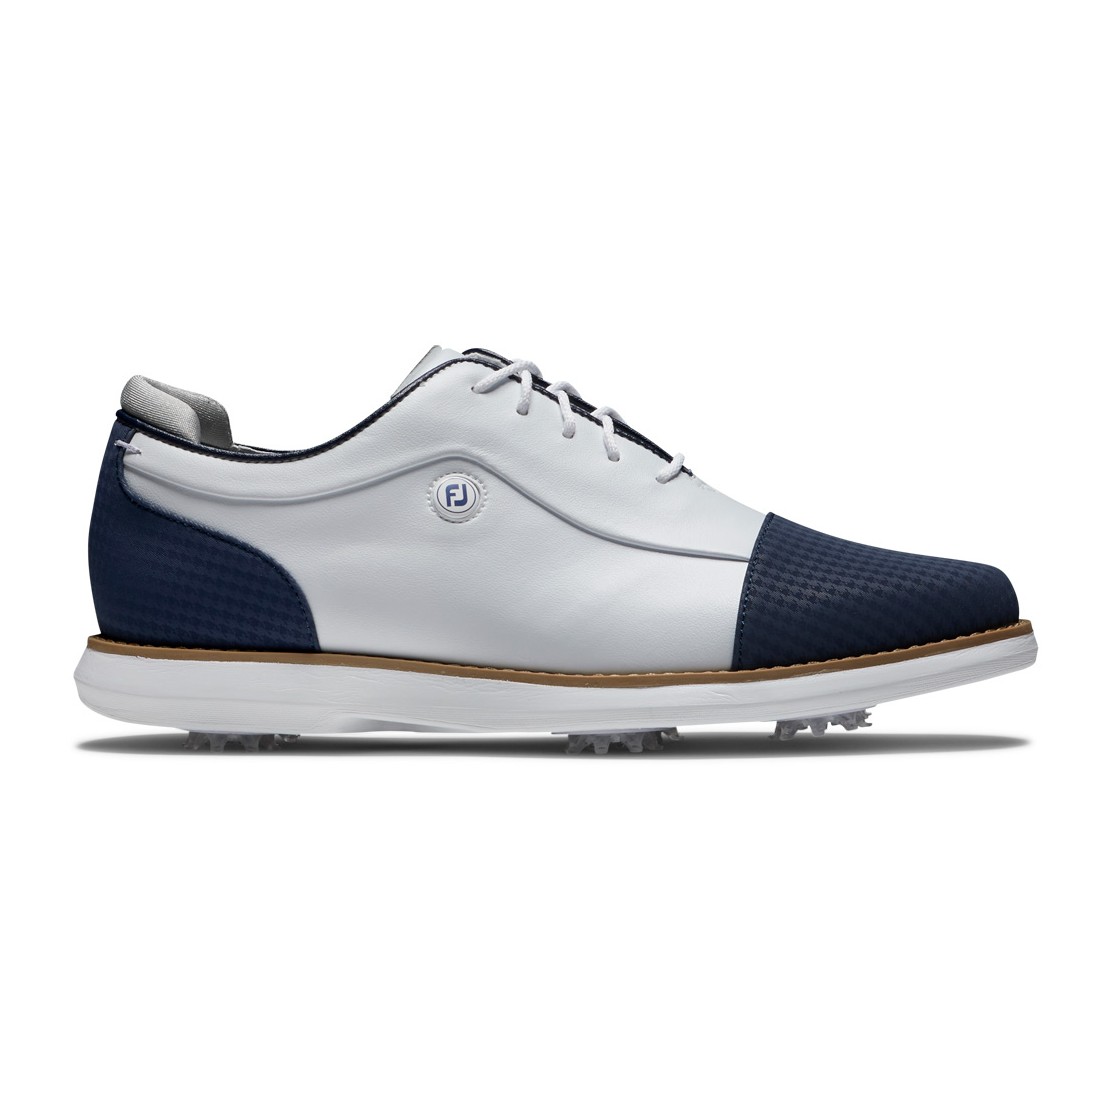 Footjoy chaussures Traditions lady blanches/marines